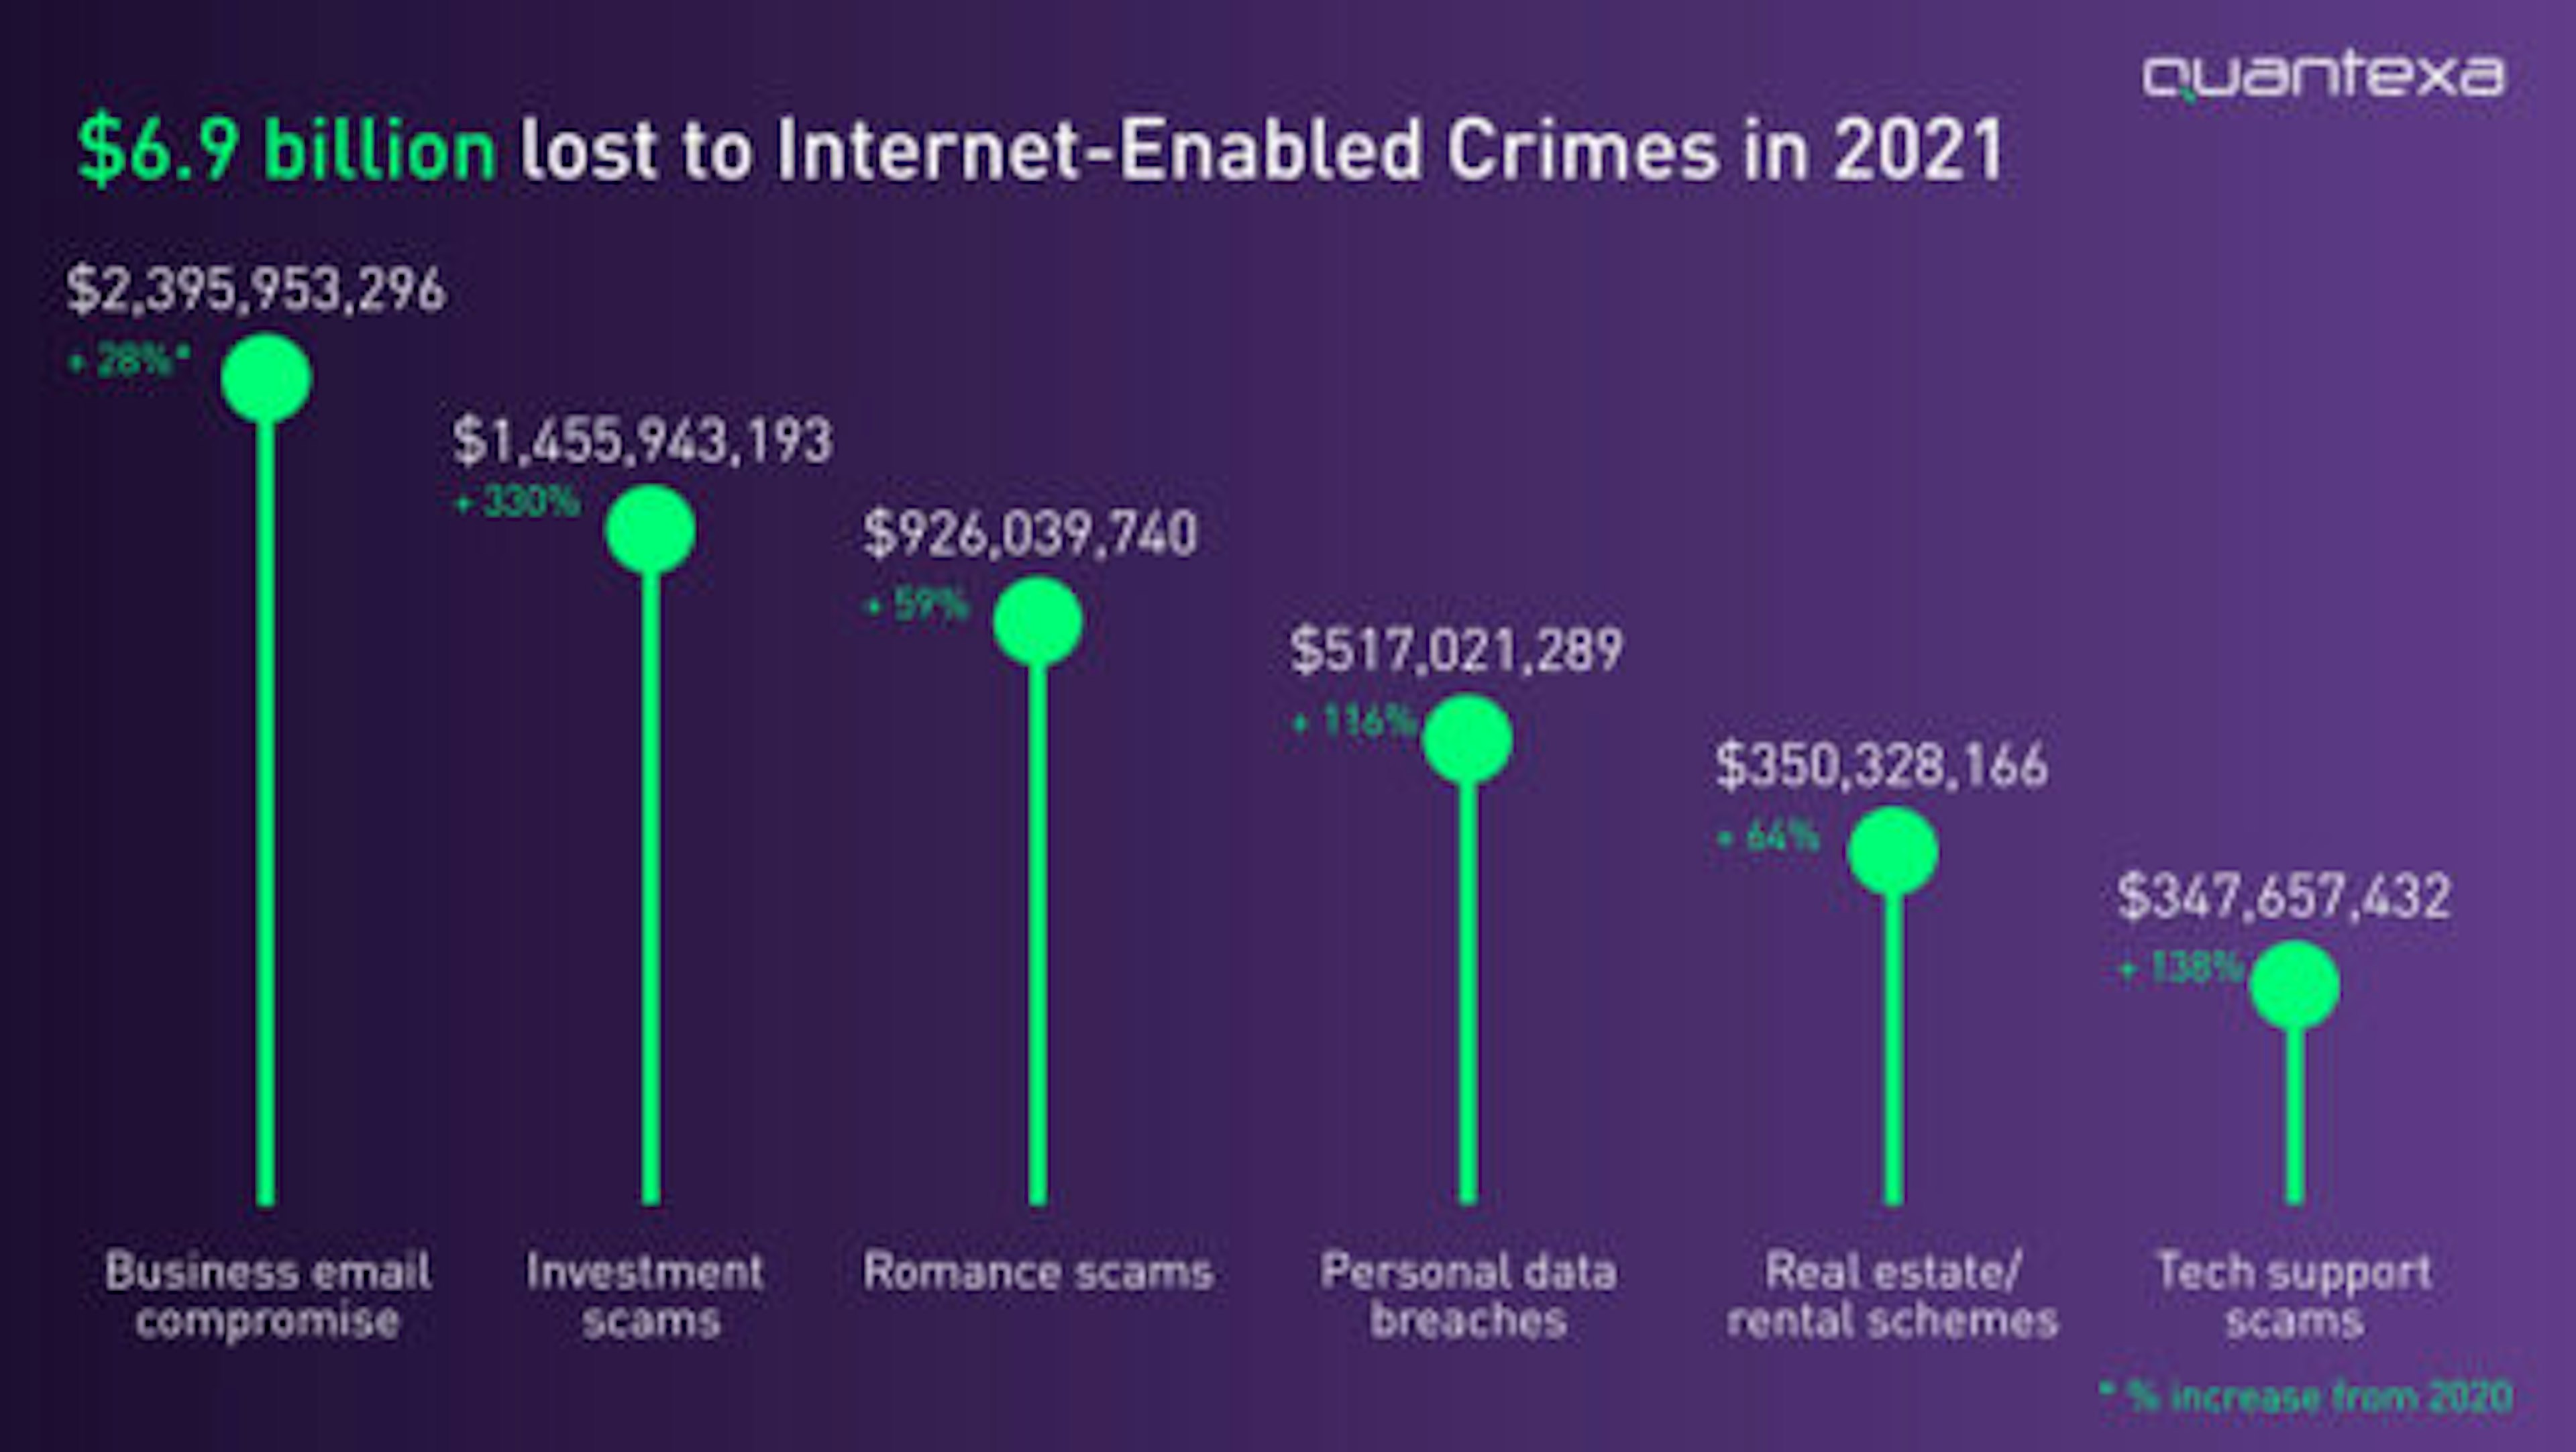 How much money was lost due to financial scams in 2021